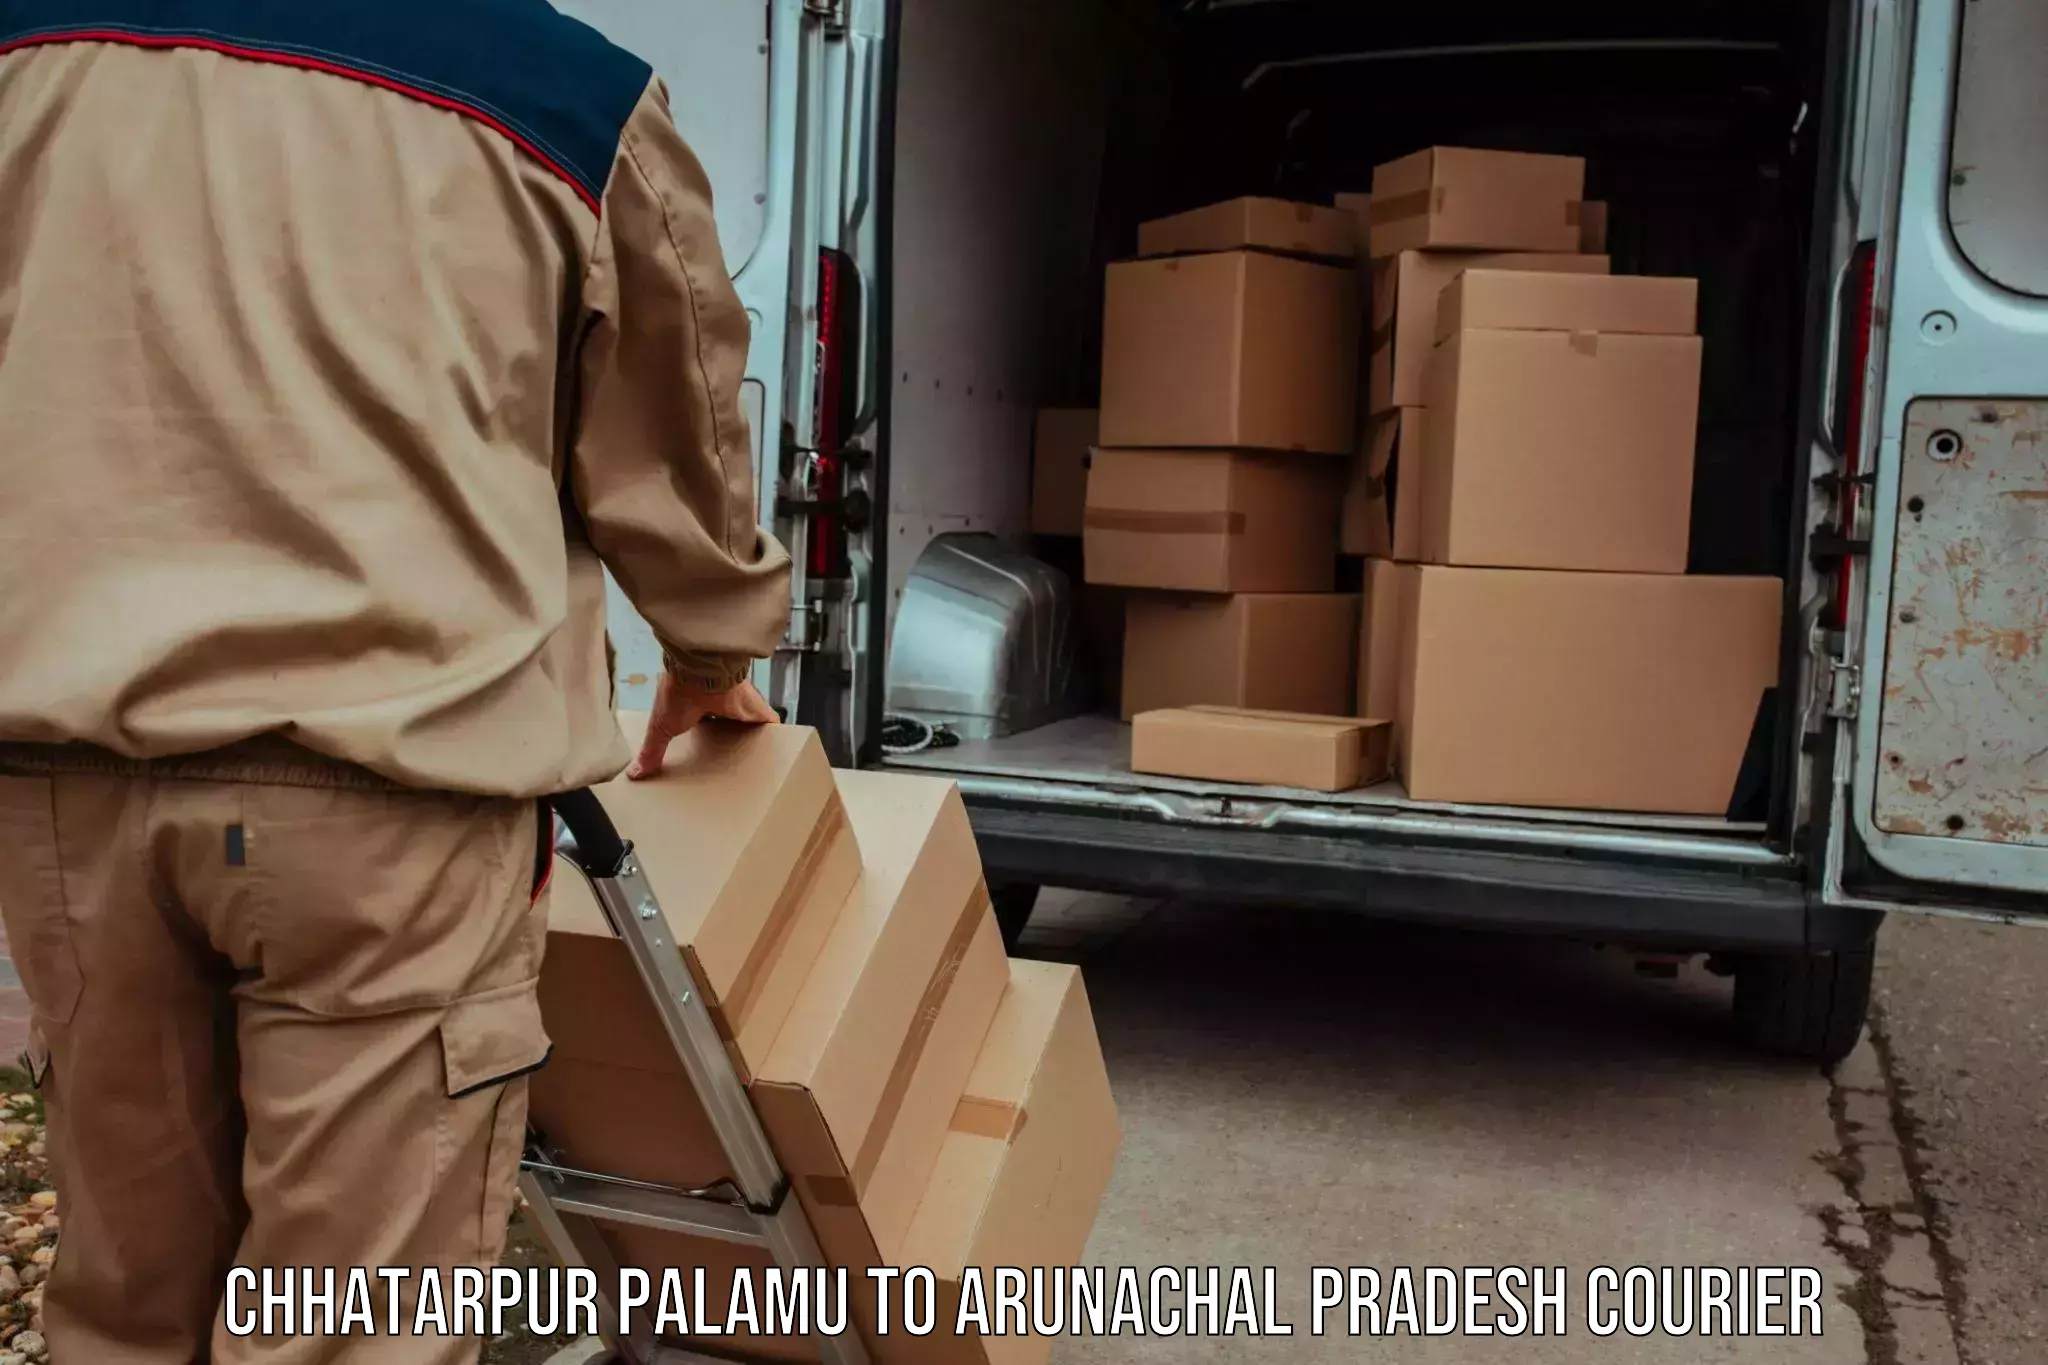 Reliable courier service Chhatarpur Palamu to Lower Dibang Valley